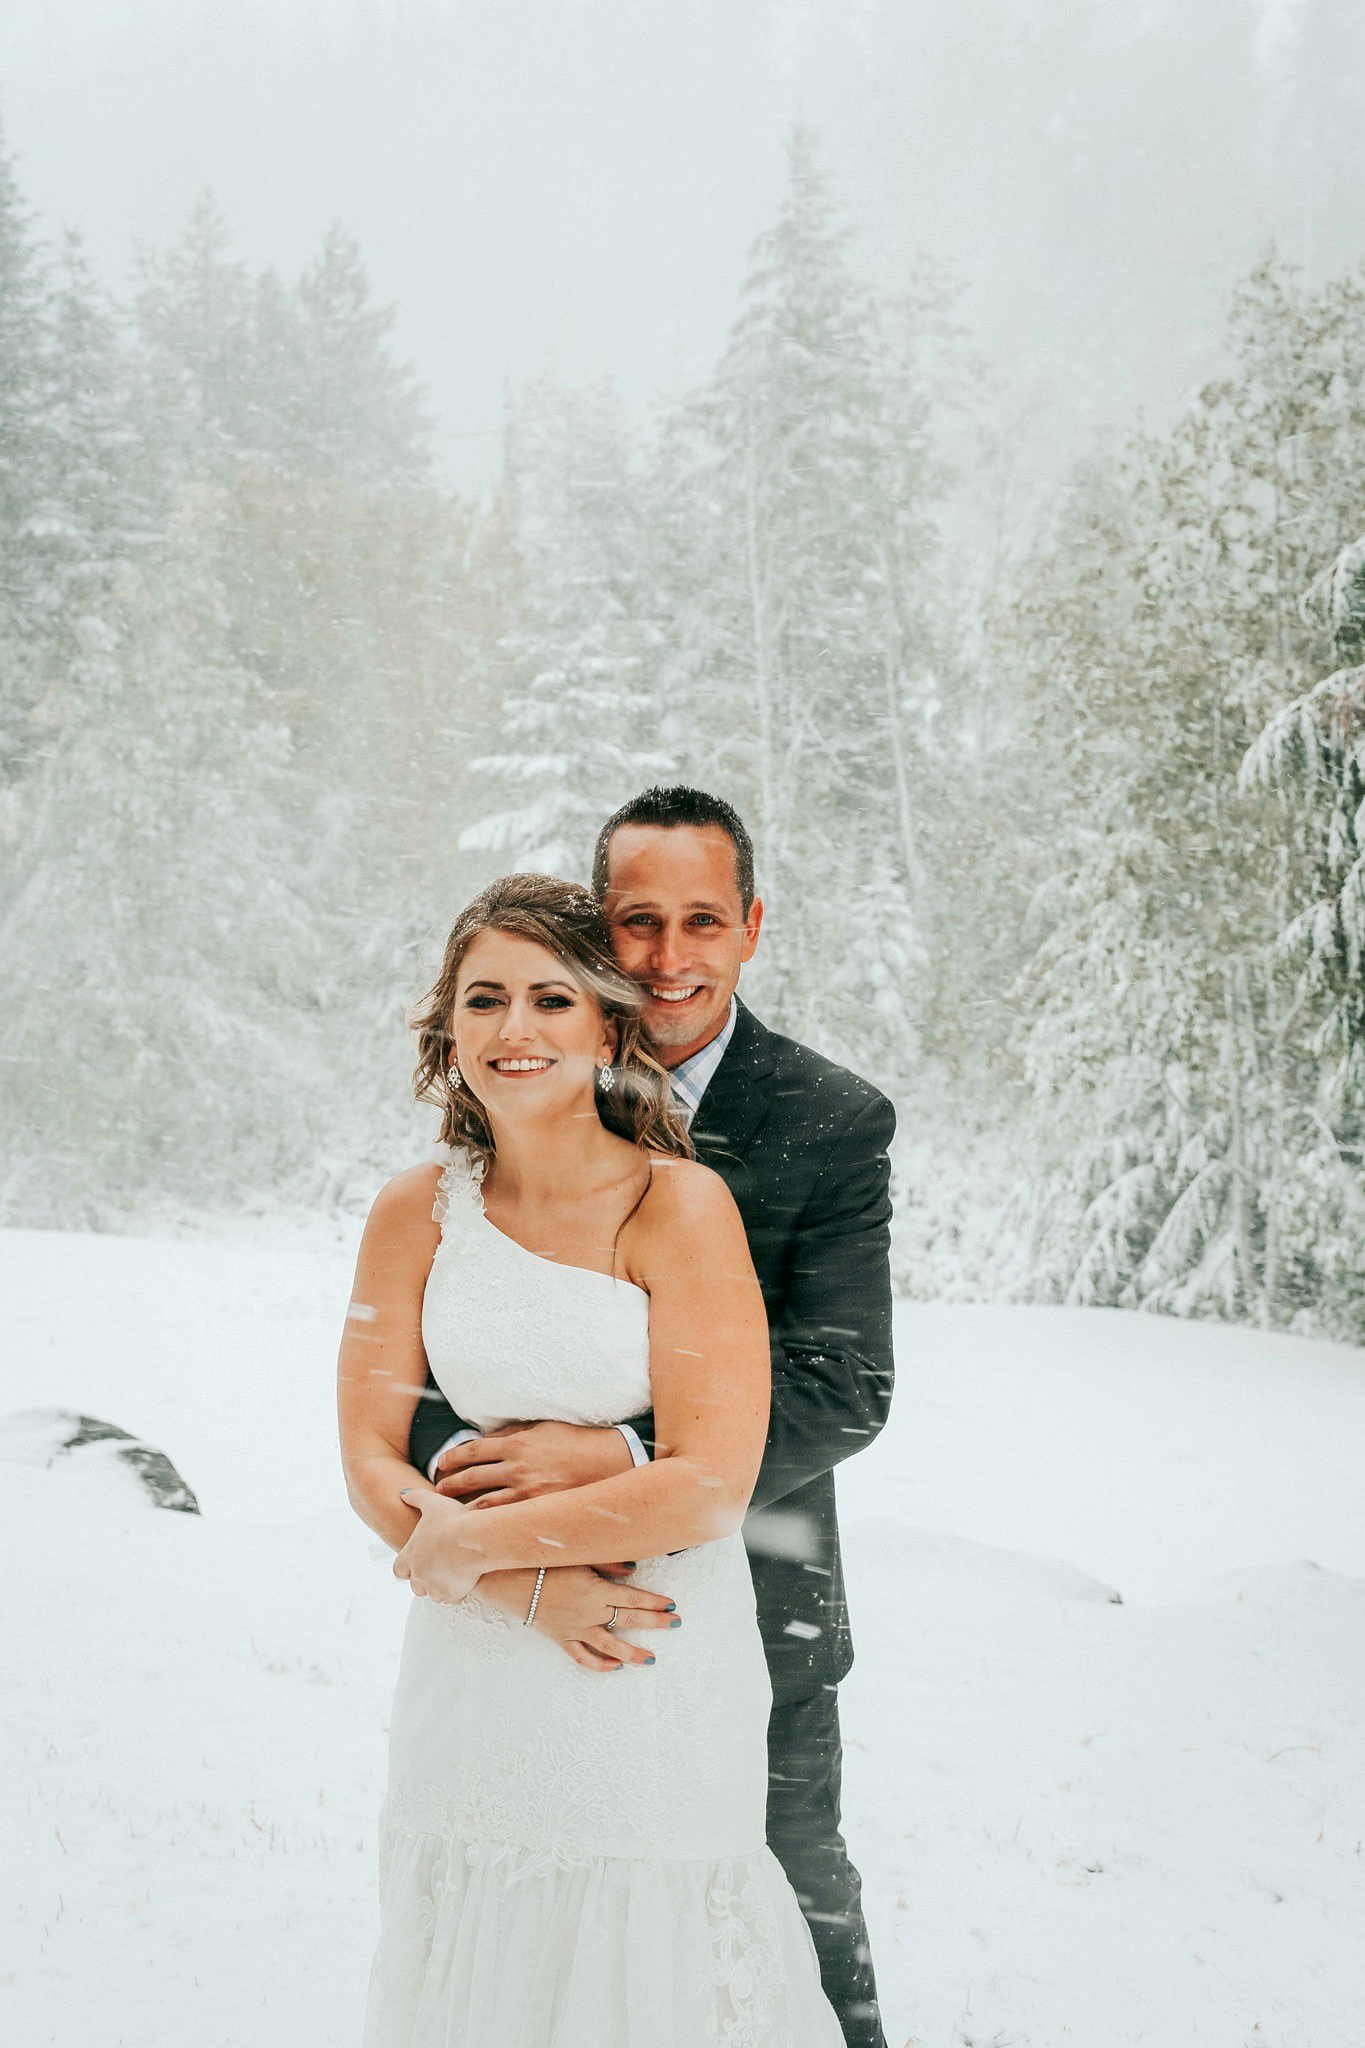 PHOTO: A bride and groom expecting fall foliage as the background of their wedding day were greeted by a snowstorm in Mount Spokane, Wash., Sept. 28, 2019.